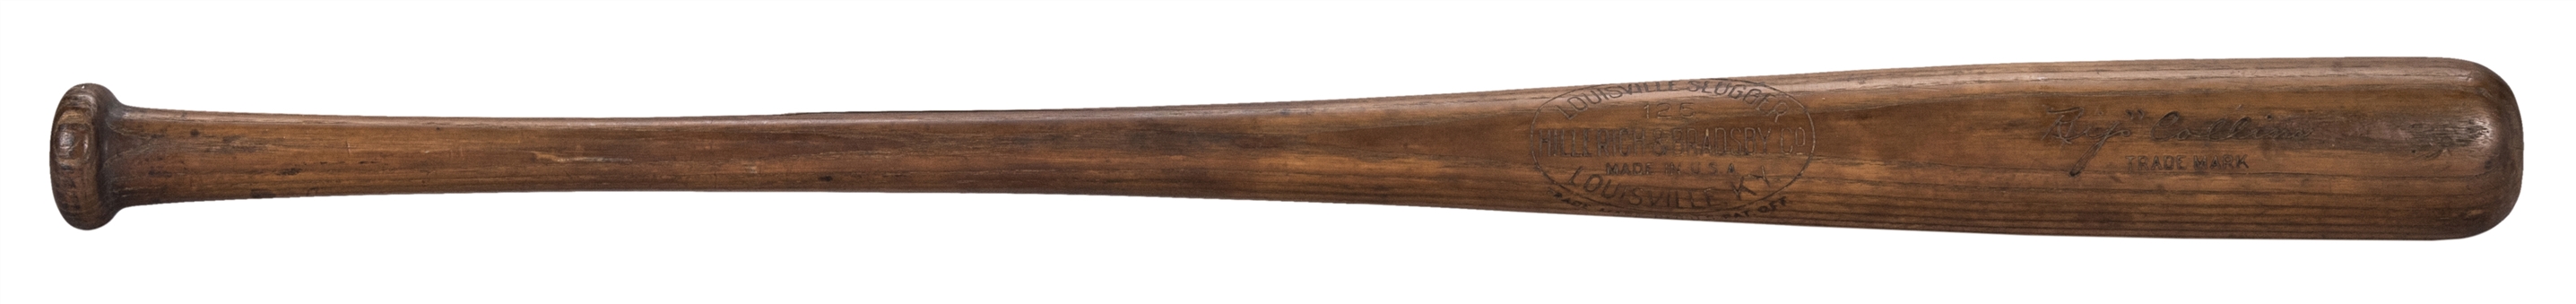 1928-31 James "Ripper" Collins Game Used Hillerich & Bradsby Professional Model Bat (PSA/DNA)